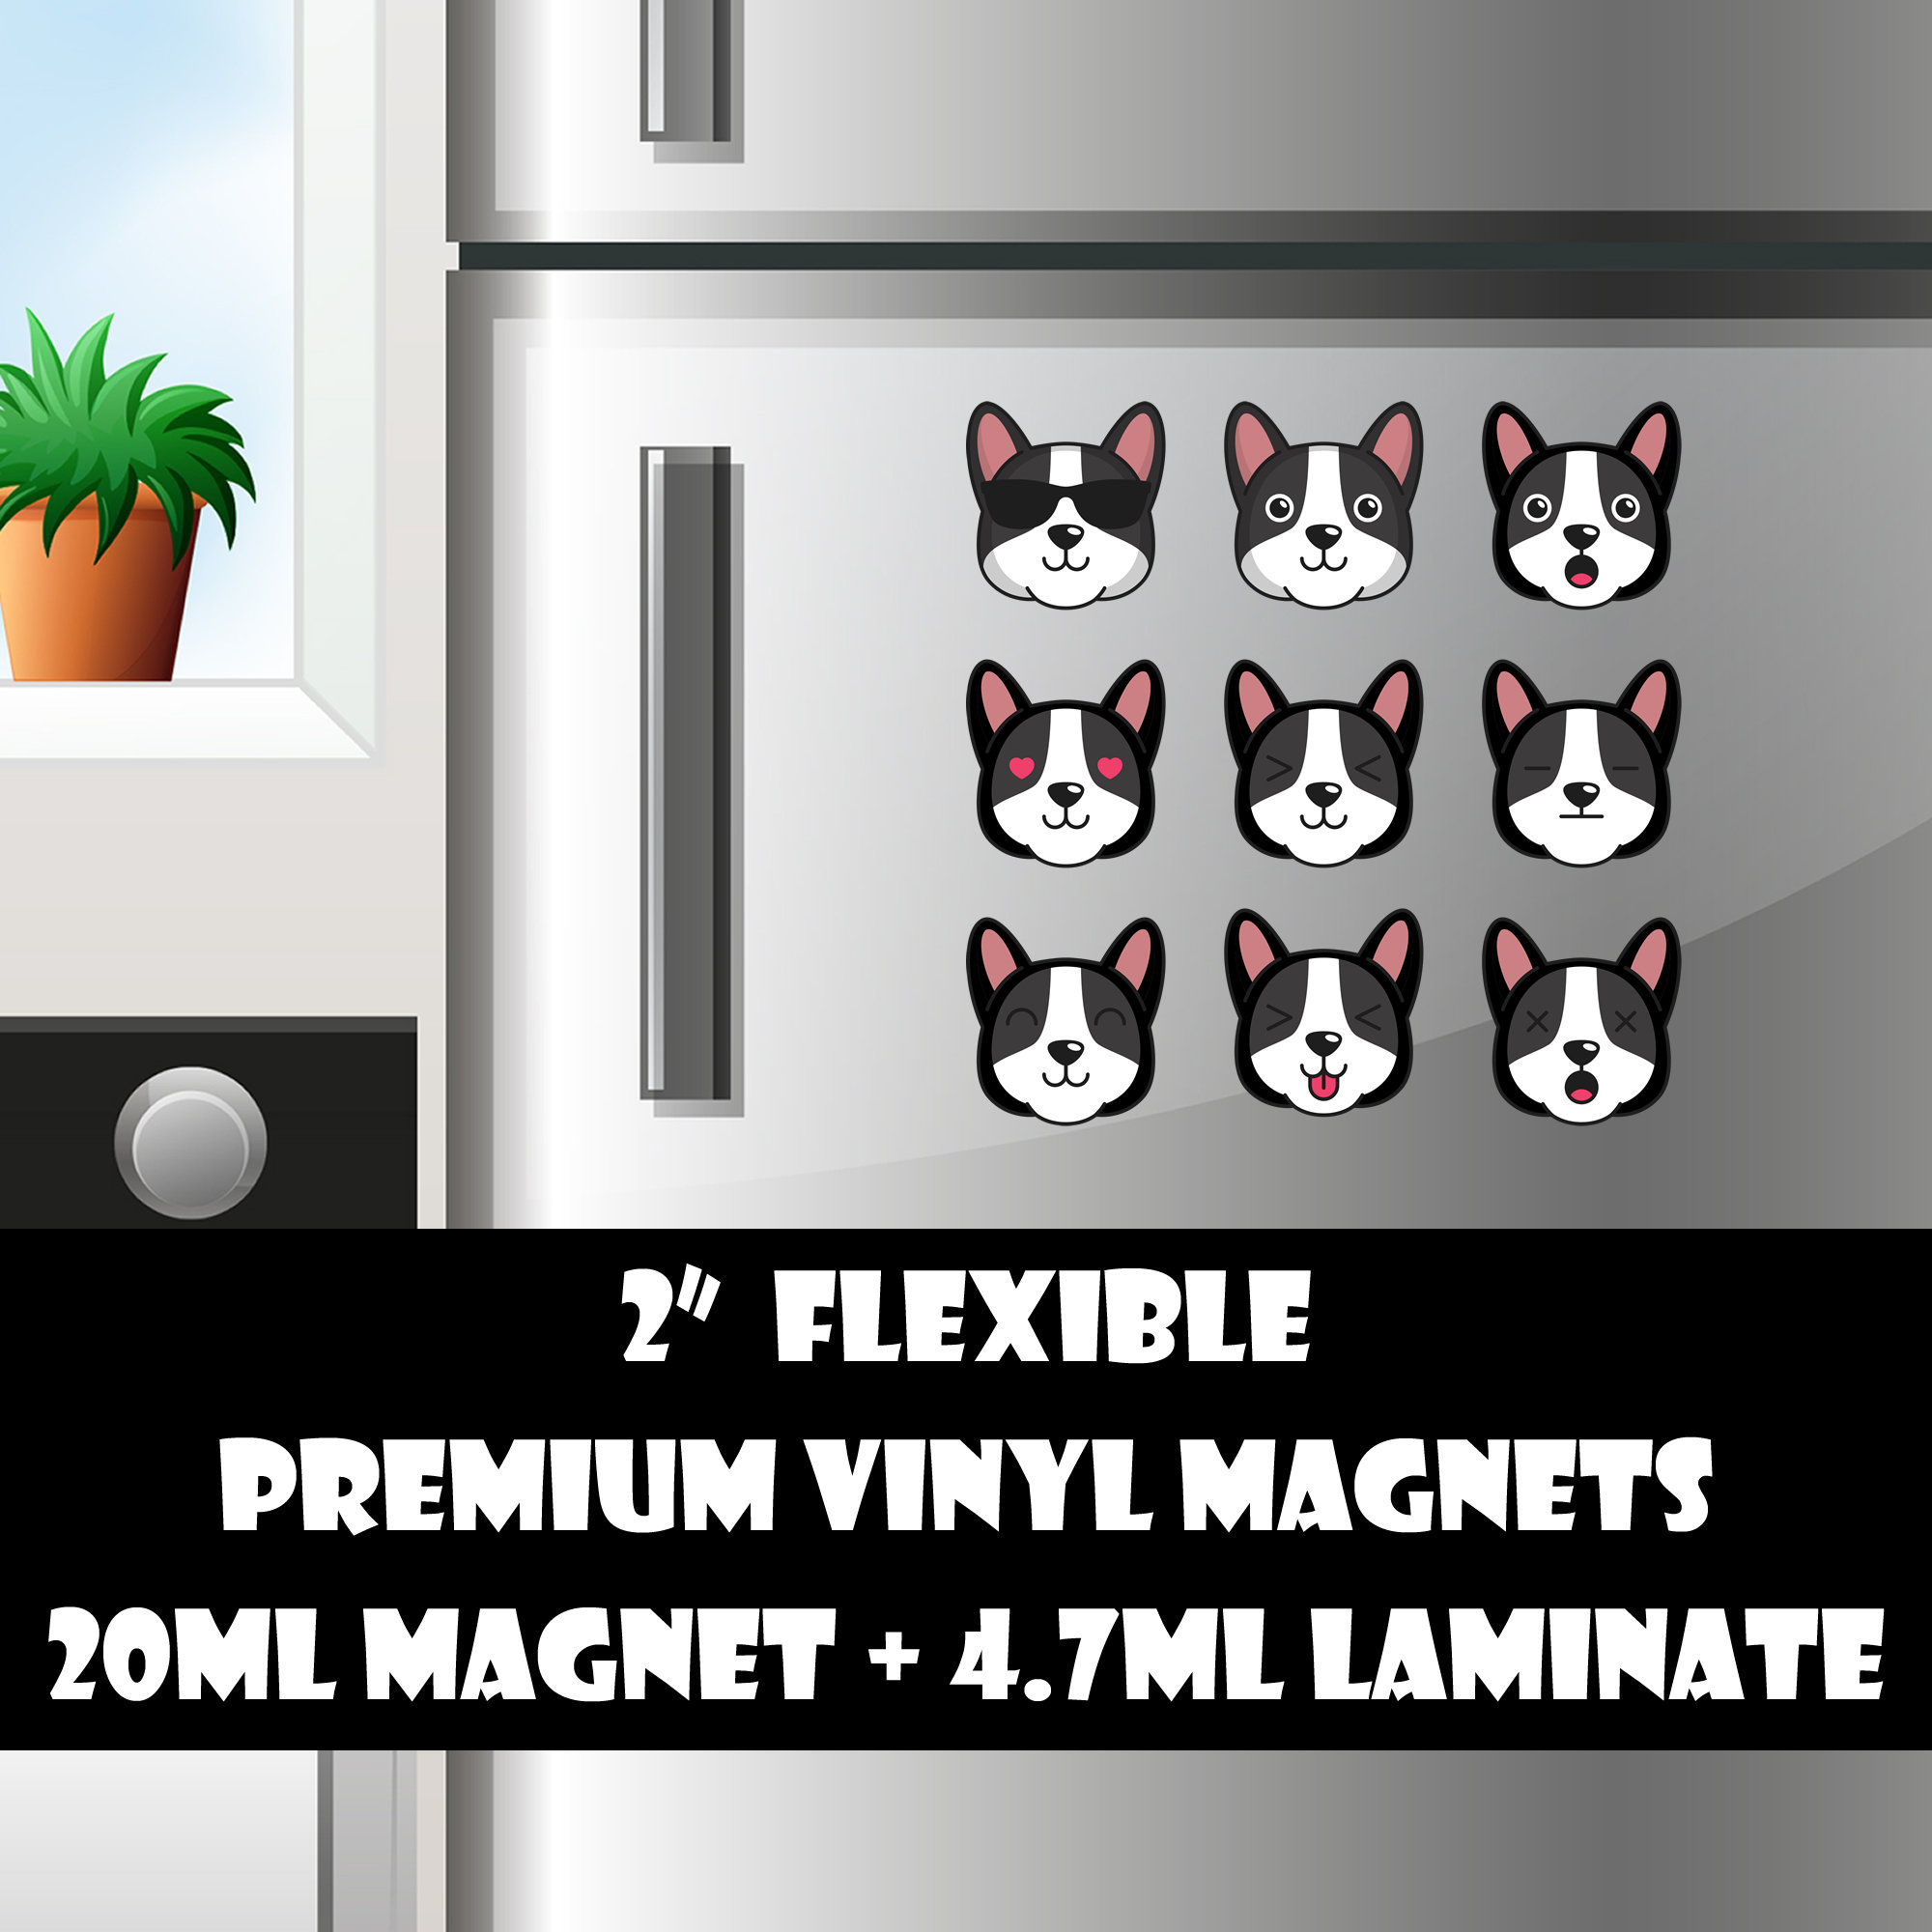 9 2inch cat fridge magnets or stickers standard, photo or vinyl print materials with laminate or magnet options available.